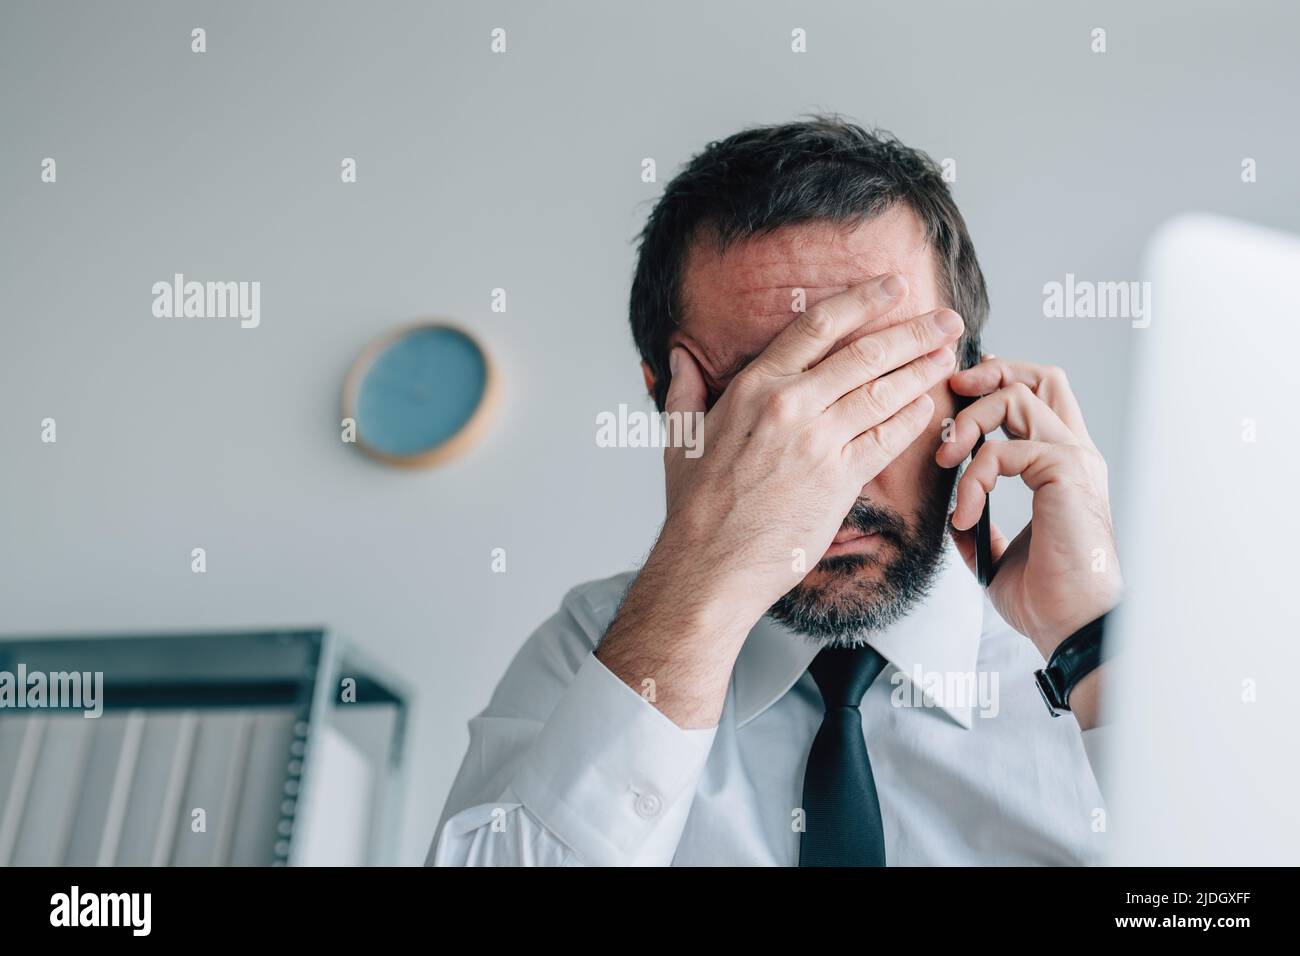 Business phone call failure, disappointed businessman using mobile phone in office, selective focus Stock Photo